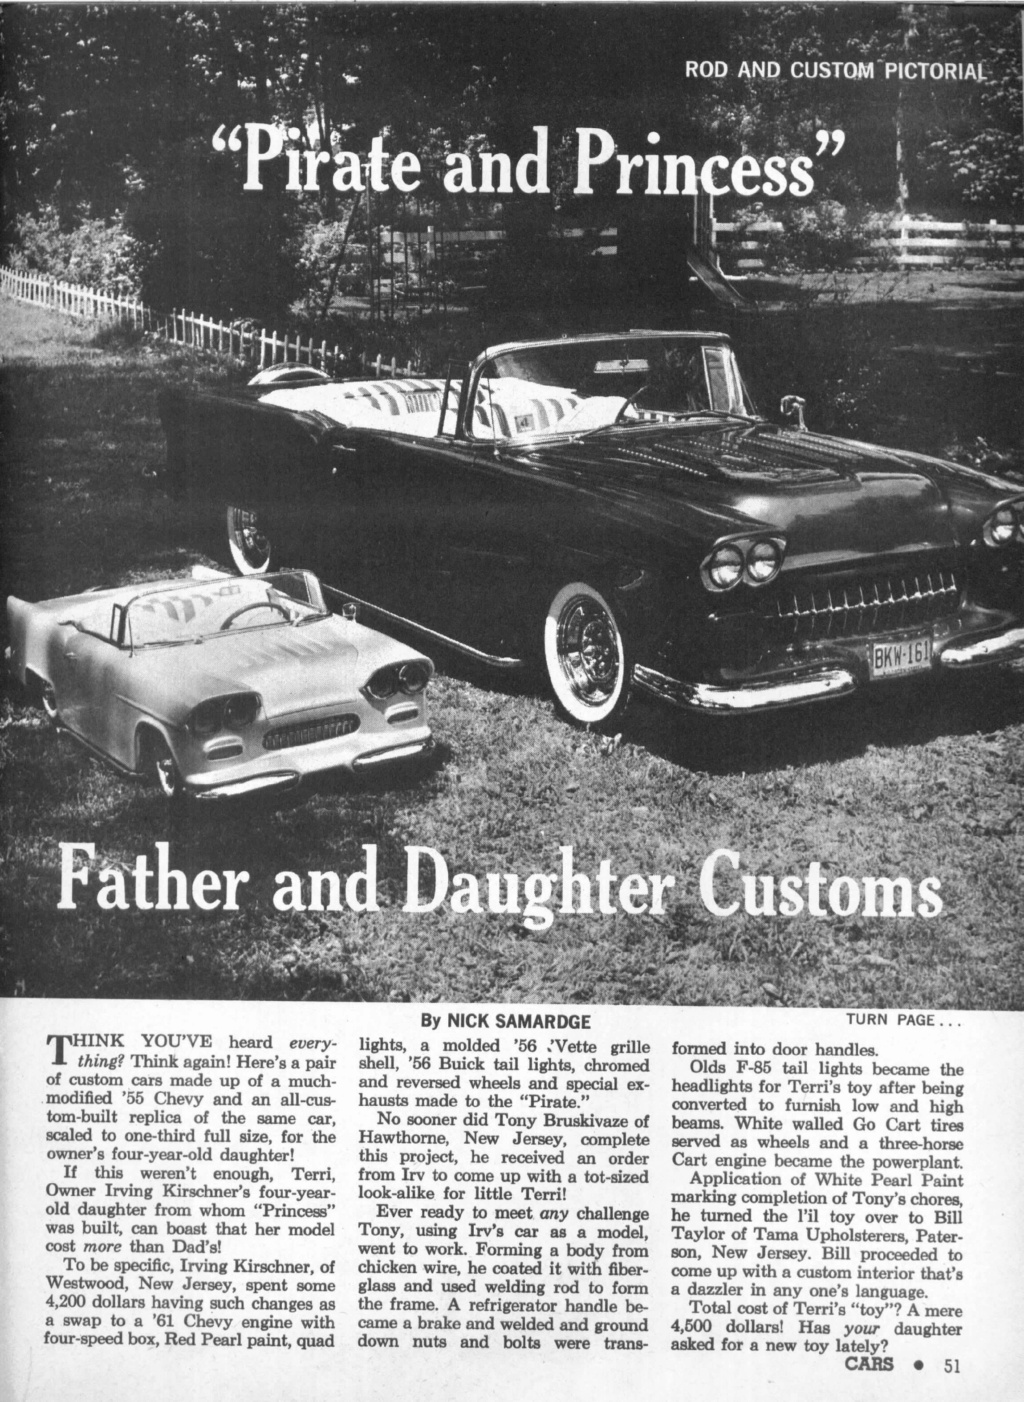 The Princess and the Pirates - Irvin Kirschner's 1955 Chevrolet 39684911